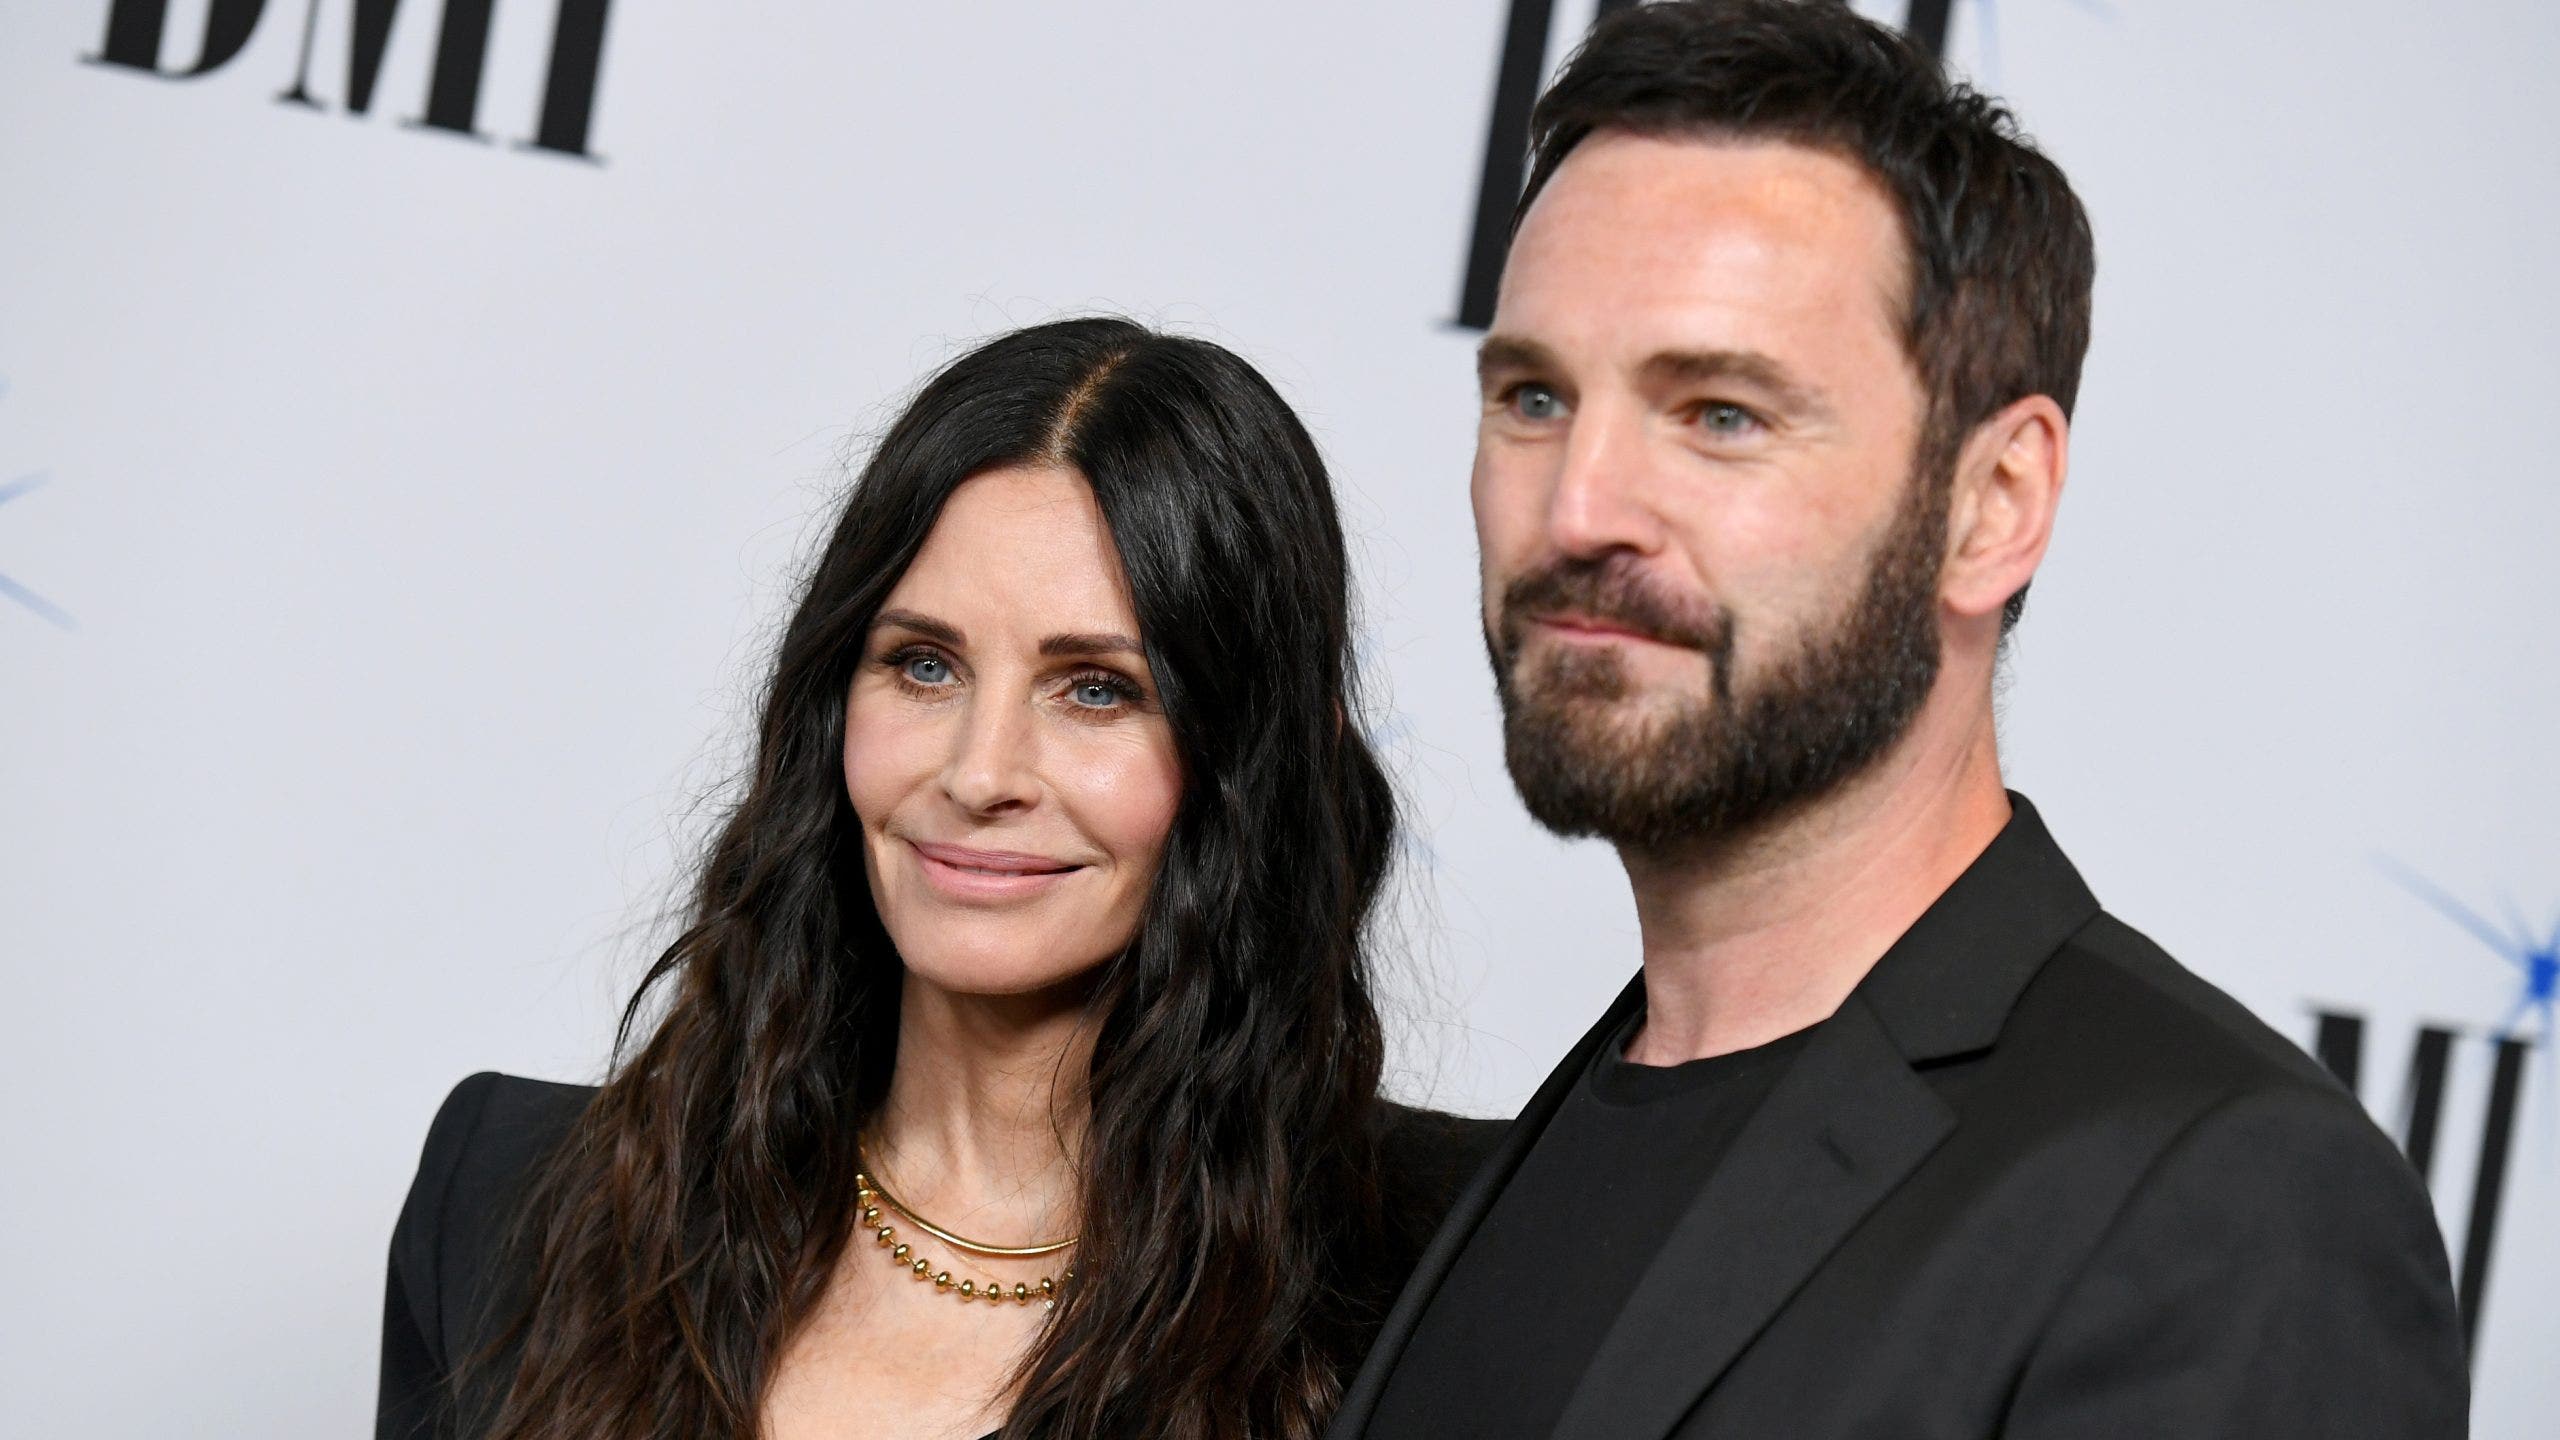 'Friends' star Courteney Cox was blindsided when fiancé dumped her just one minute into therapy session